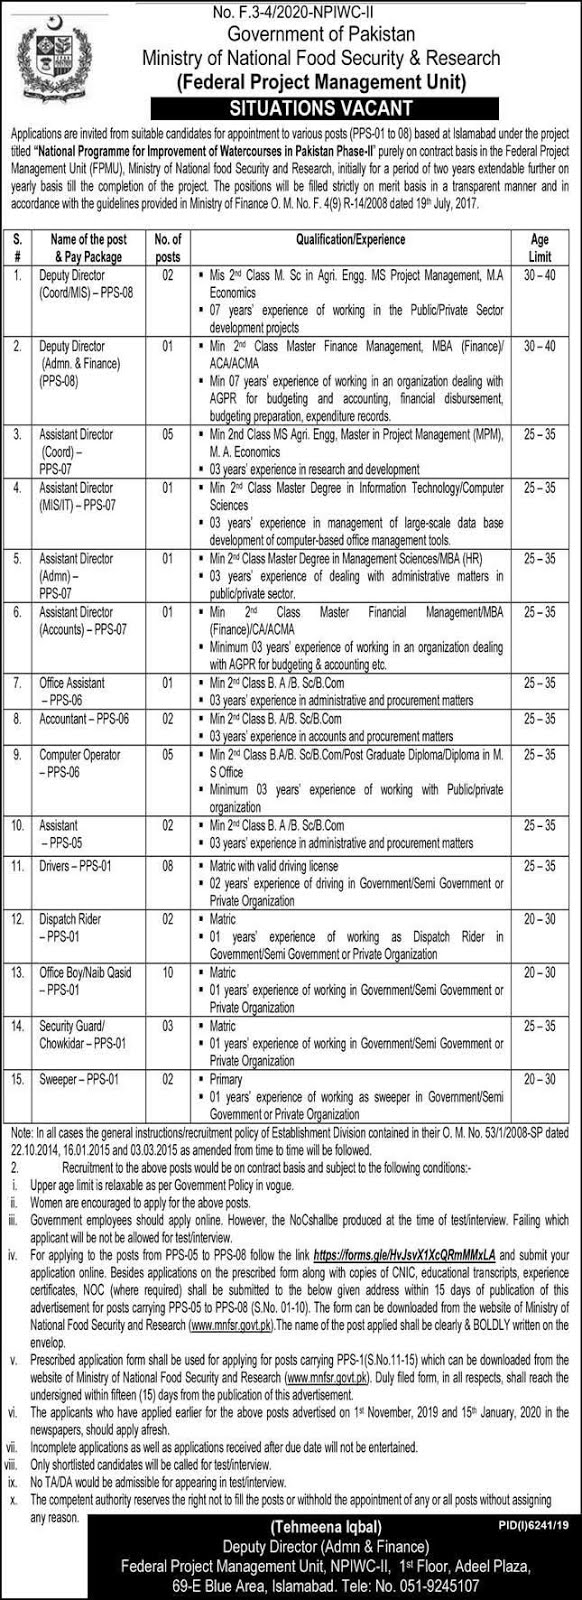 Ministry of National Food Security and Research Jobs 2020